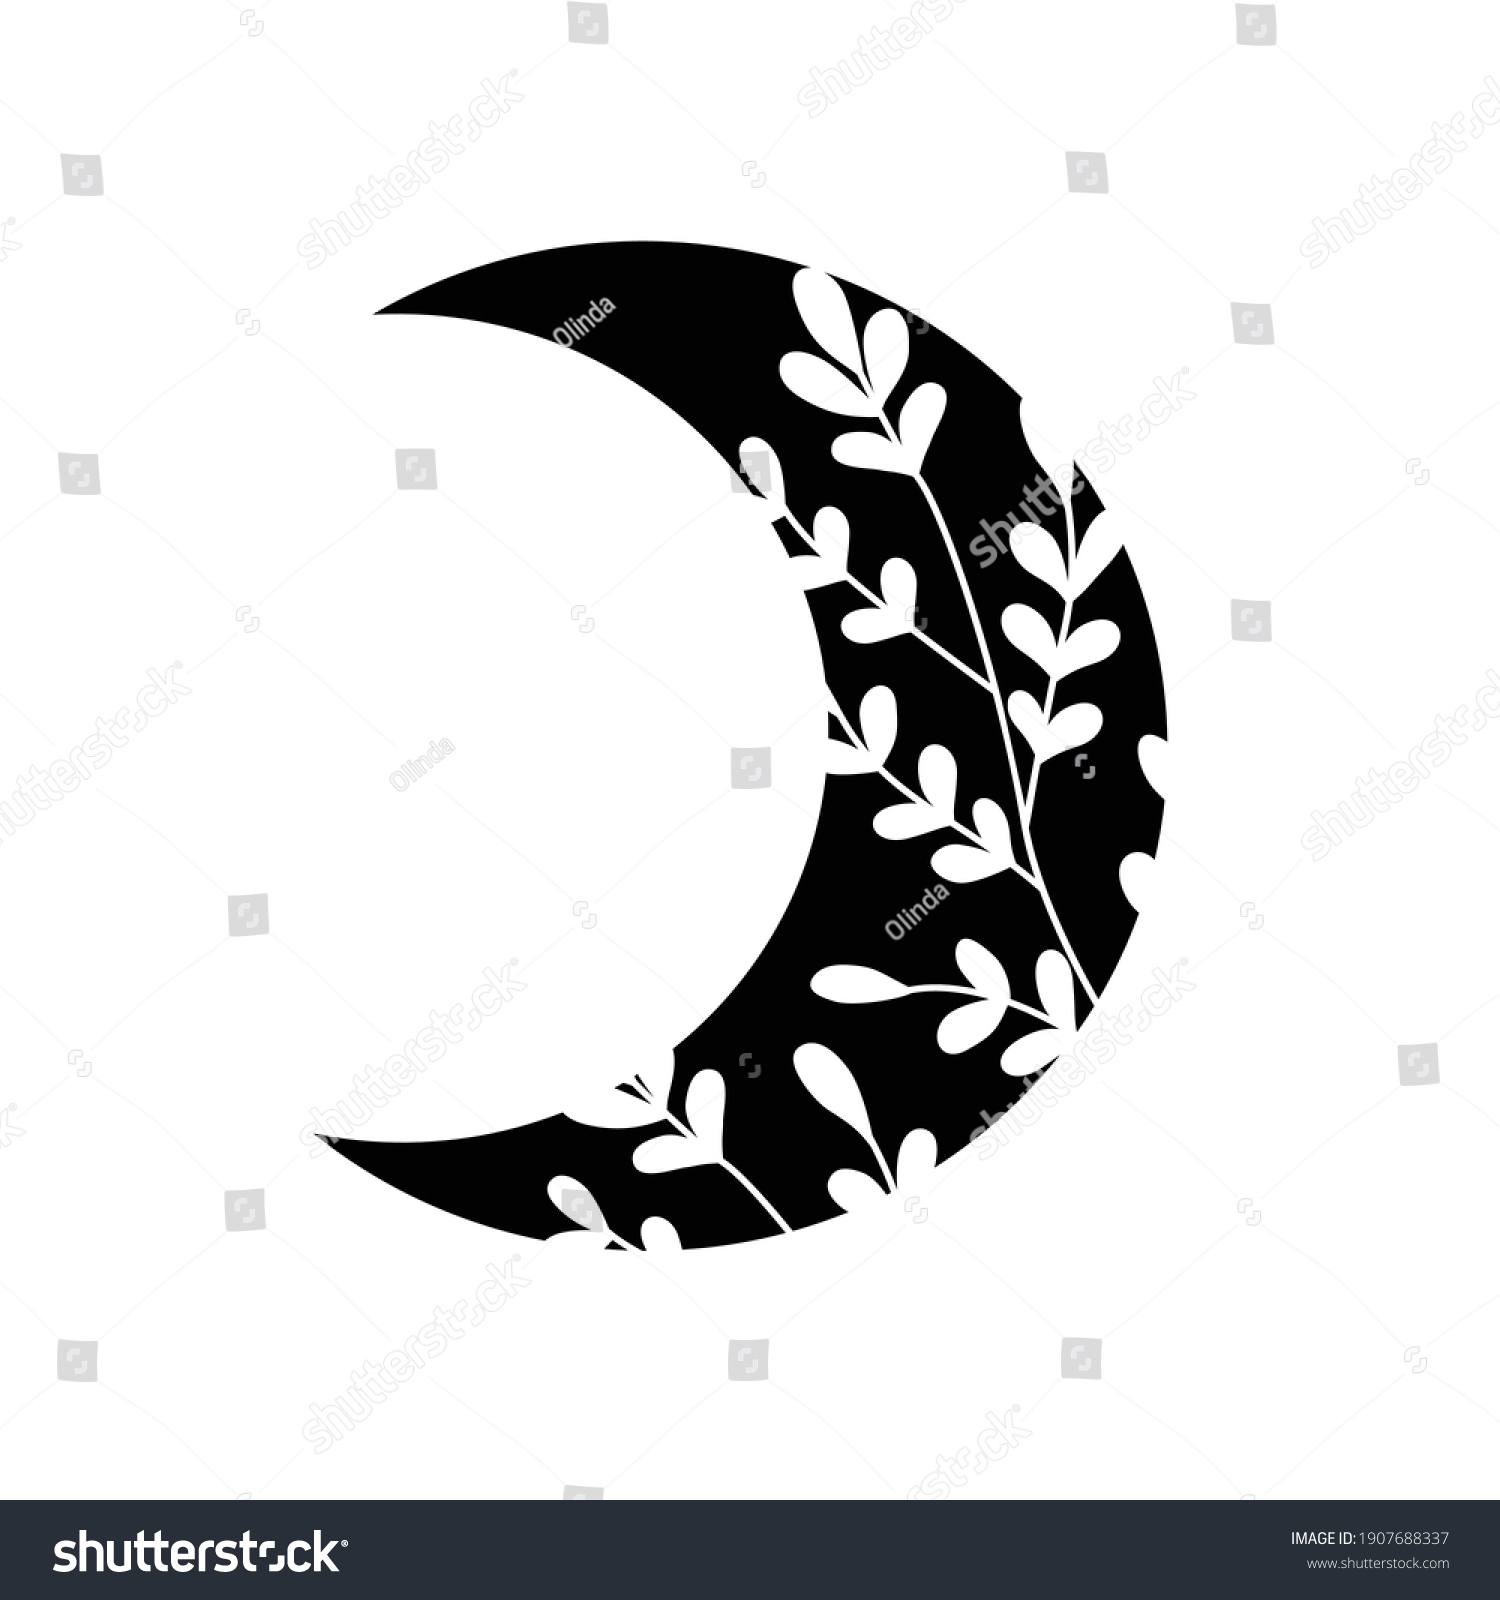 SVG of Black full moon with white lace floral ornament. Design element for logos icons. Vector illustration. Modern Boho style doodle art svg